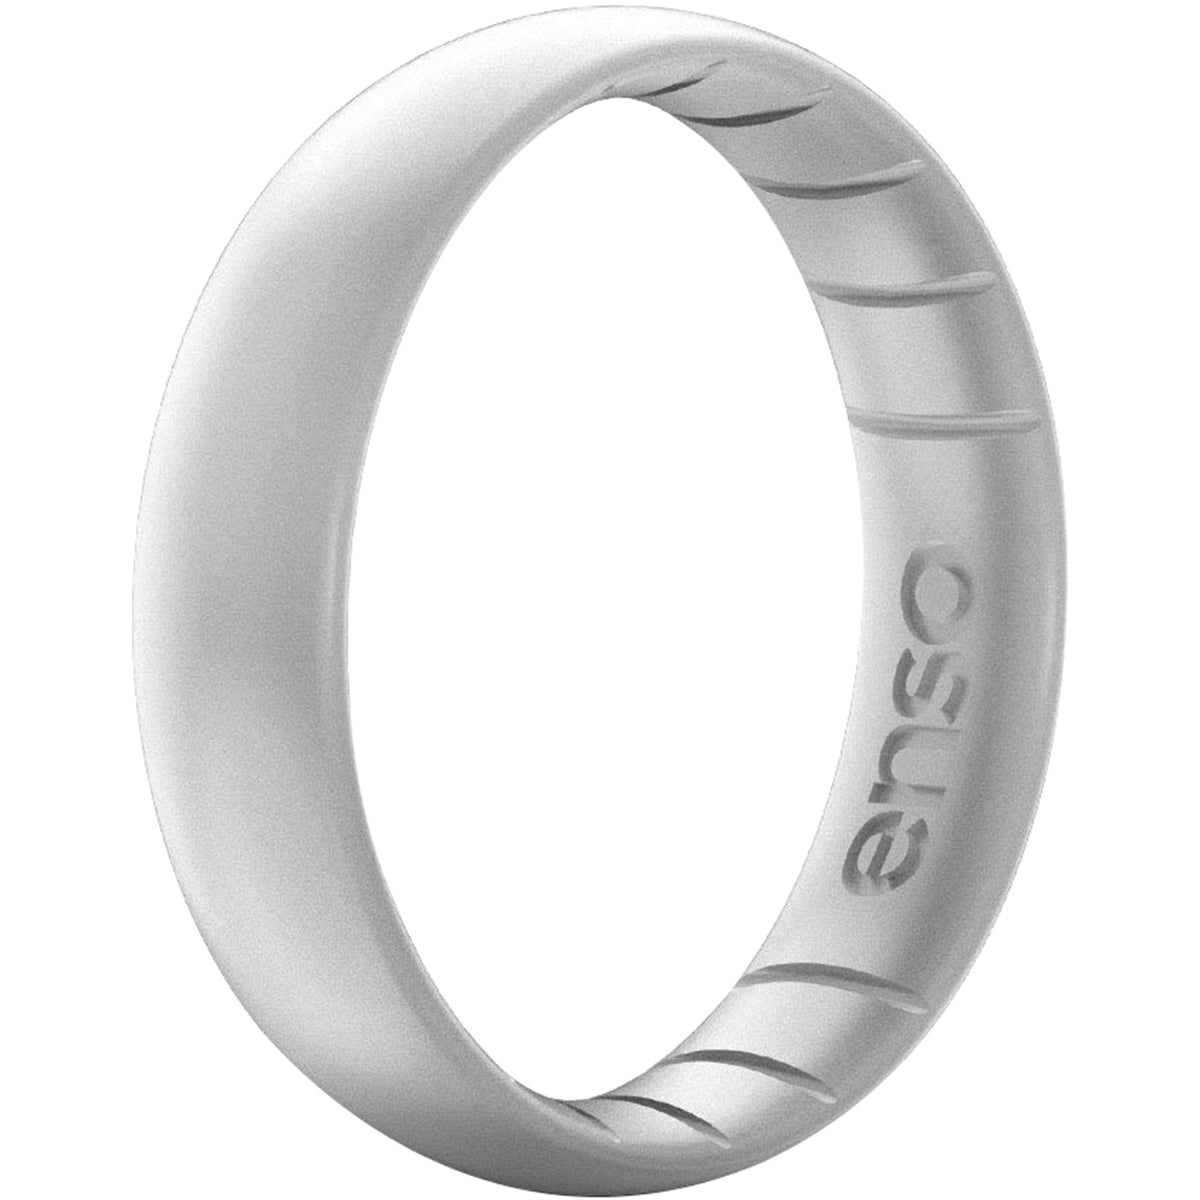 Enso Rings Thin Elements Series Silicone Ring - Silver Enso Rings